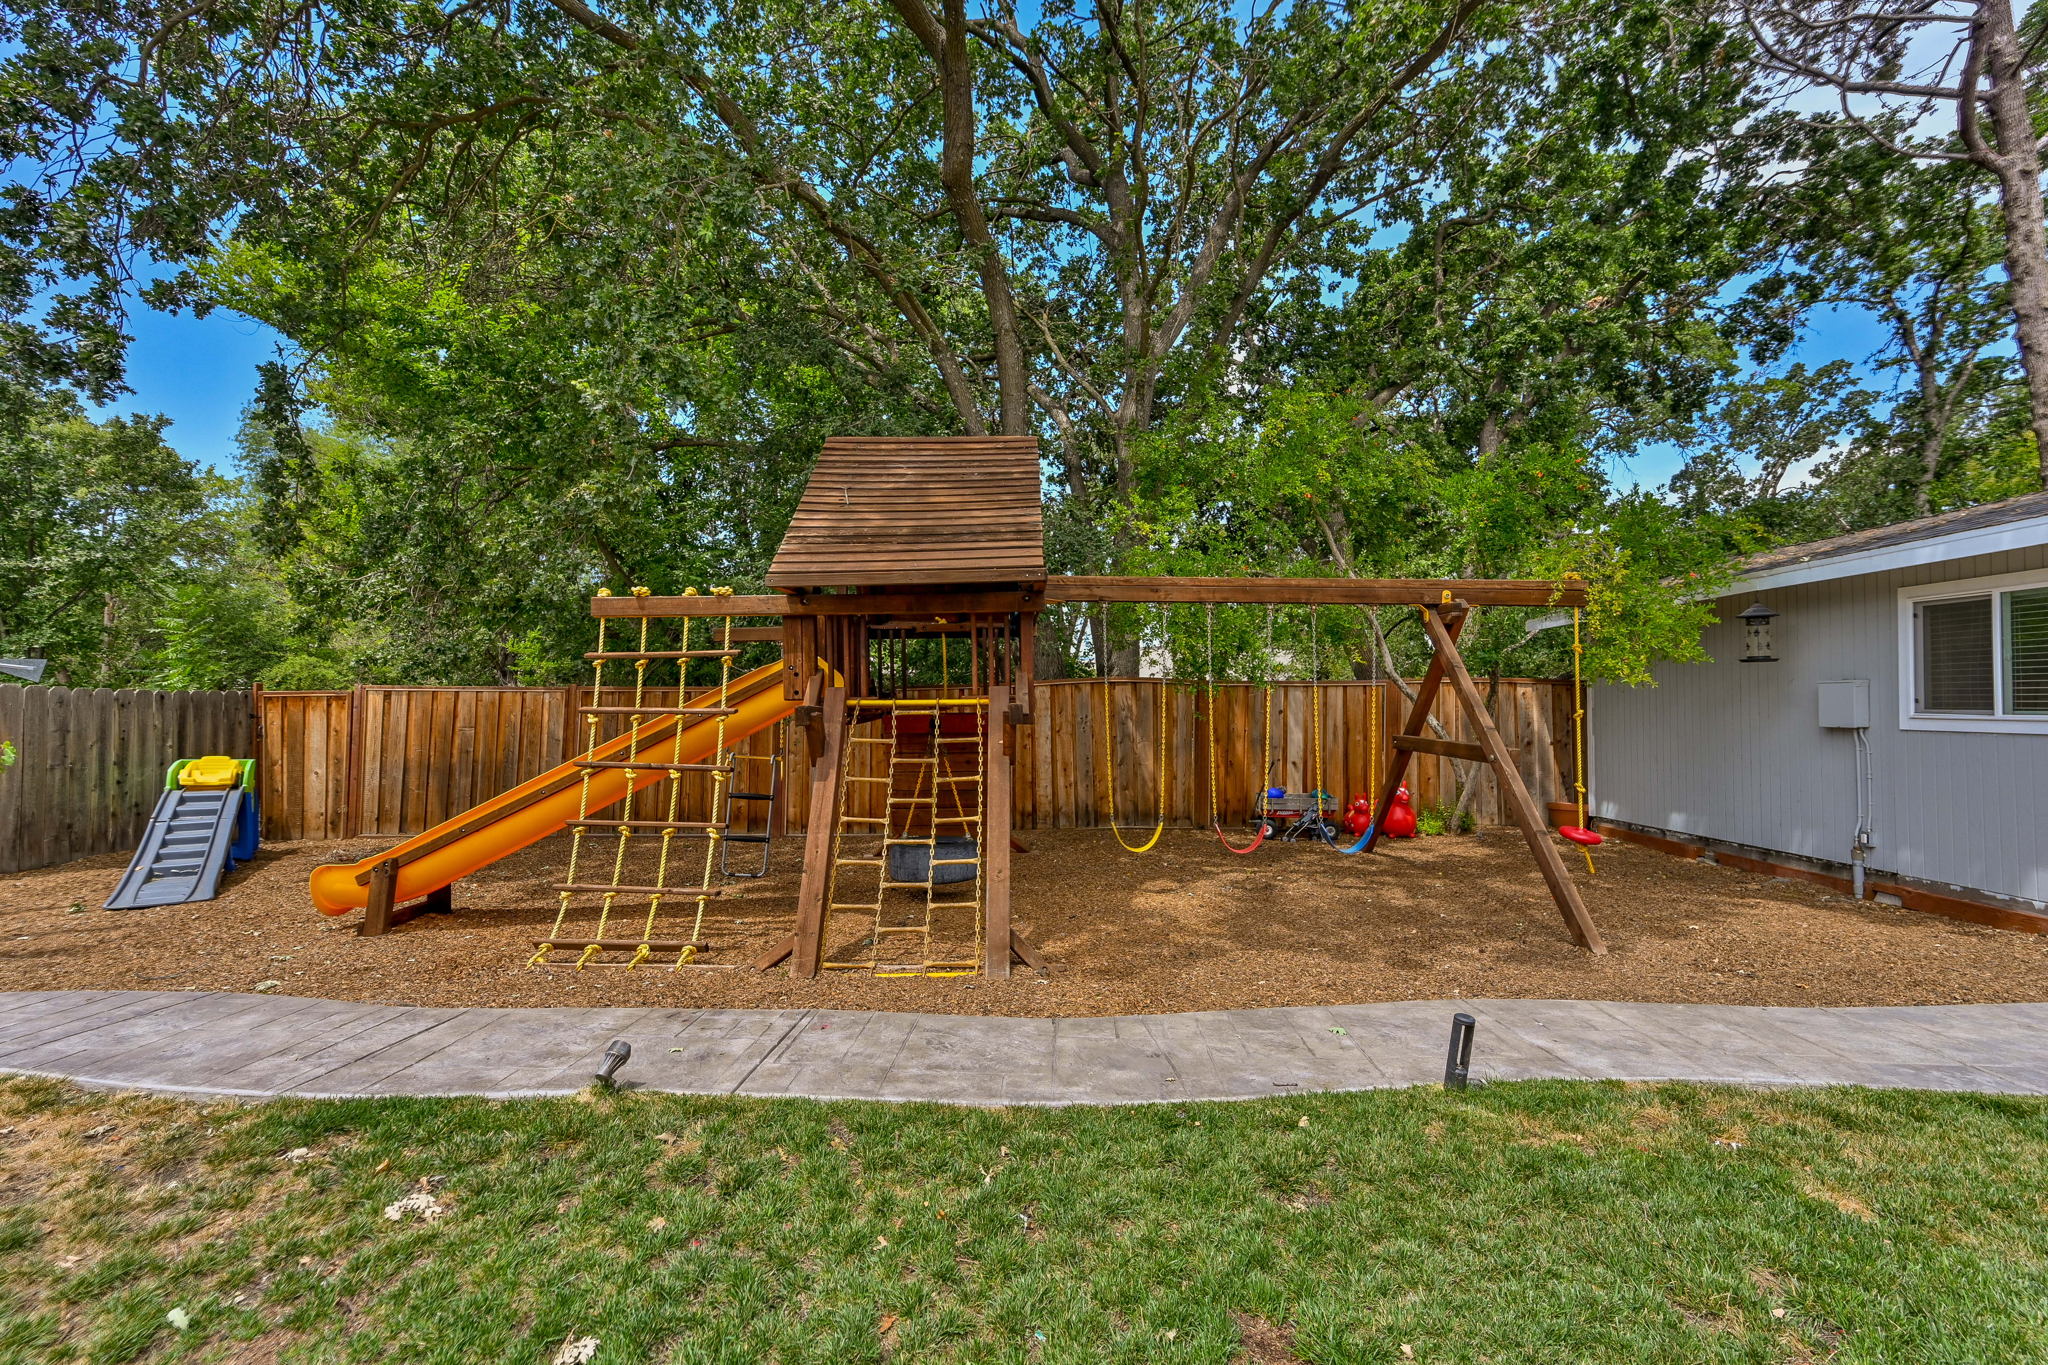 Room for Play Structure